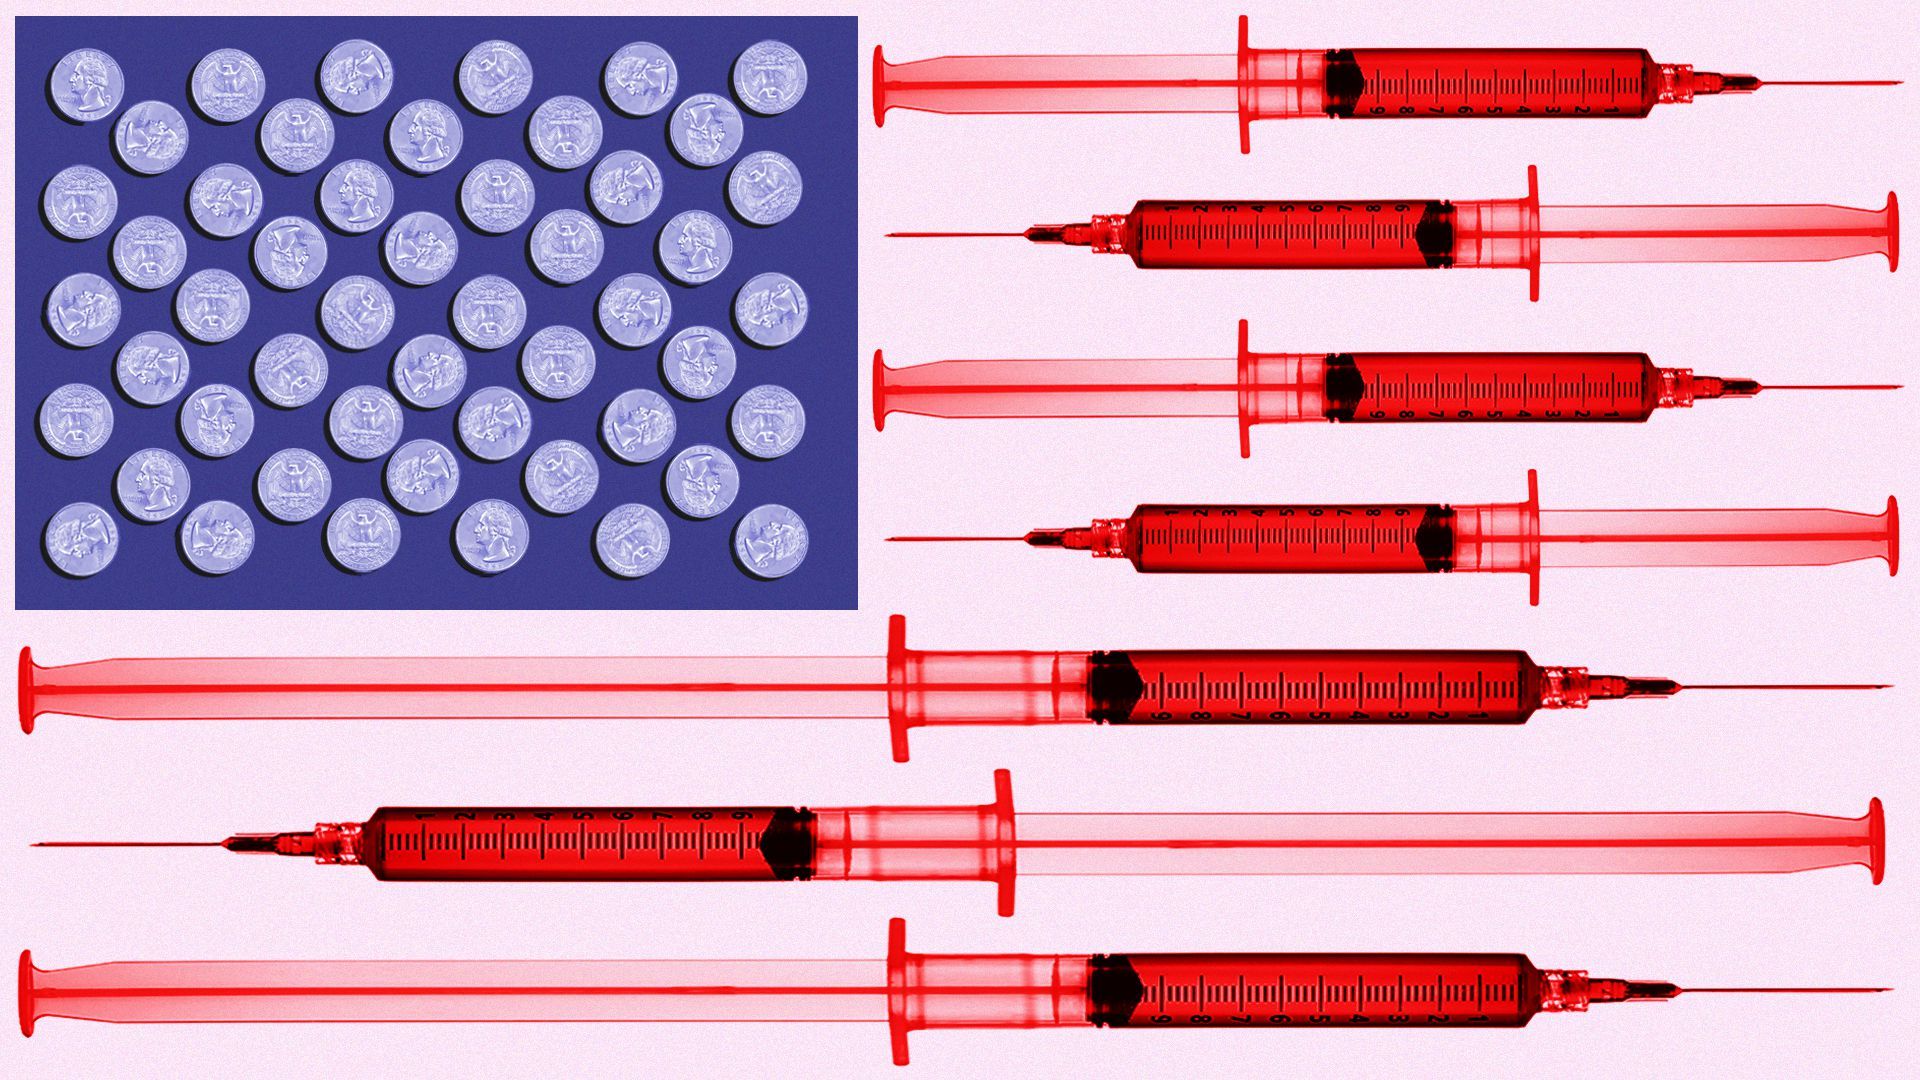 Illustration of the U.S. map made up of vaccination syringes and quartes